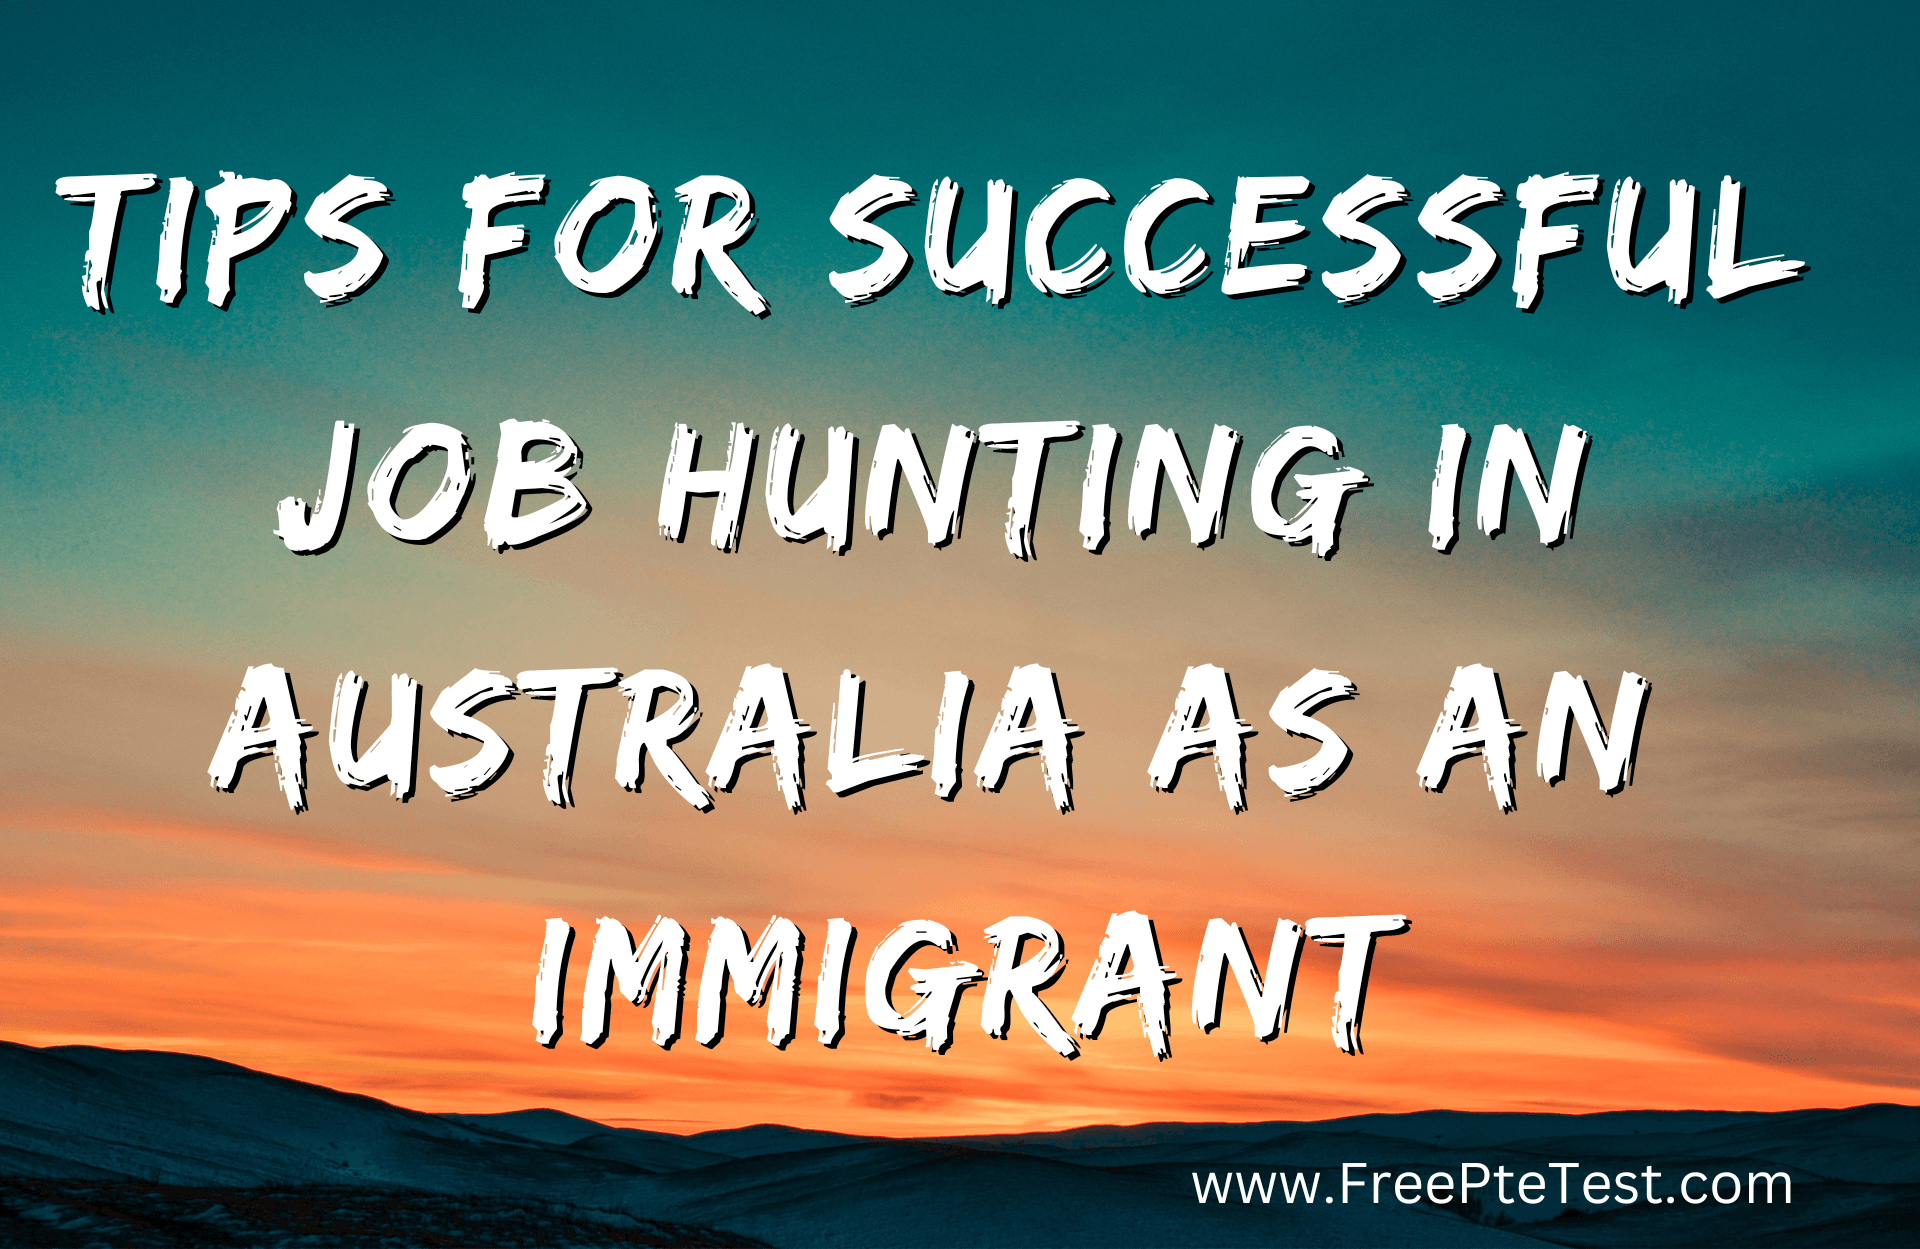 You are currently viewing Tips for successful job hunting in Australia as an immigrant